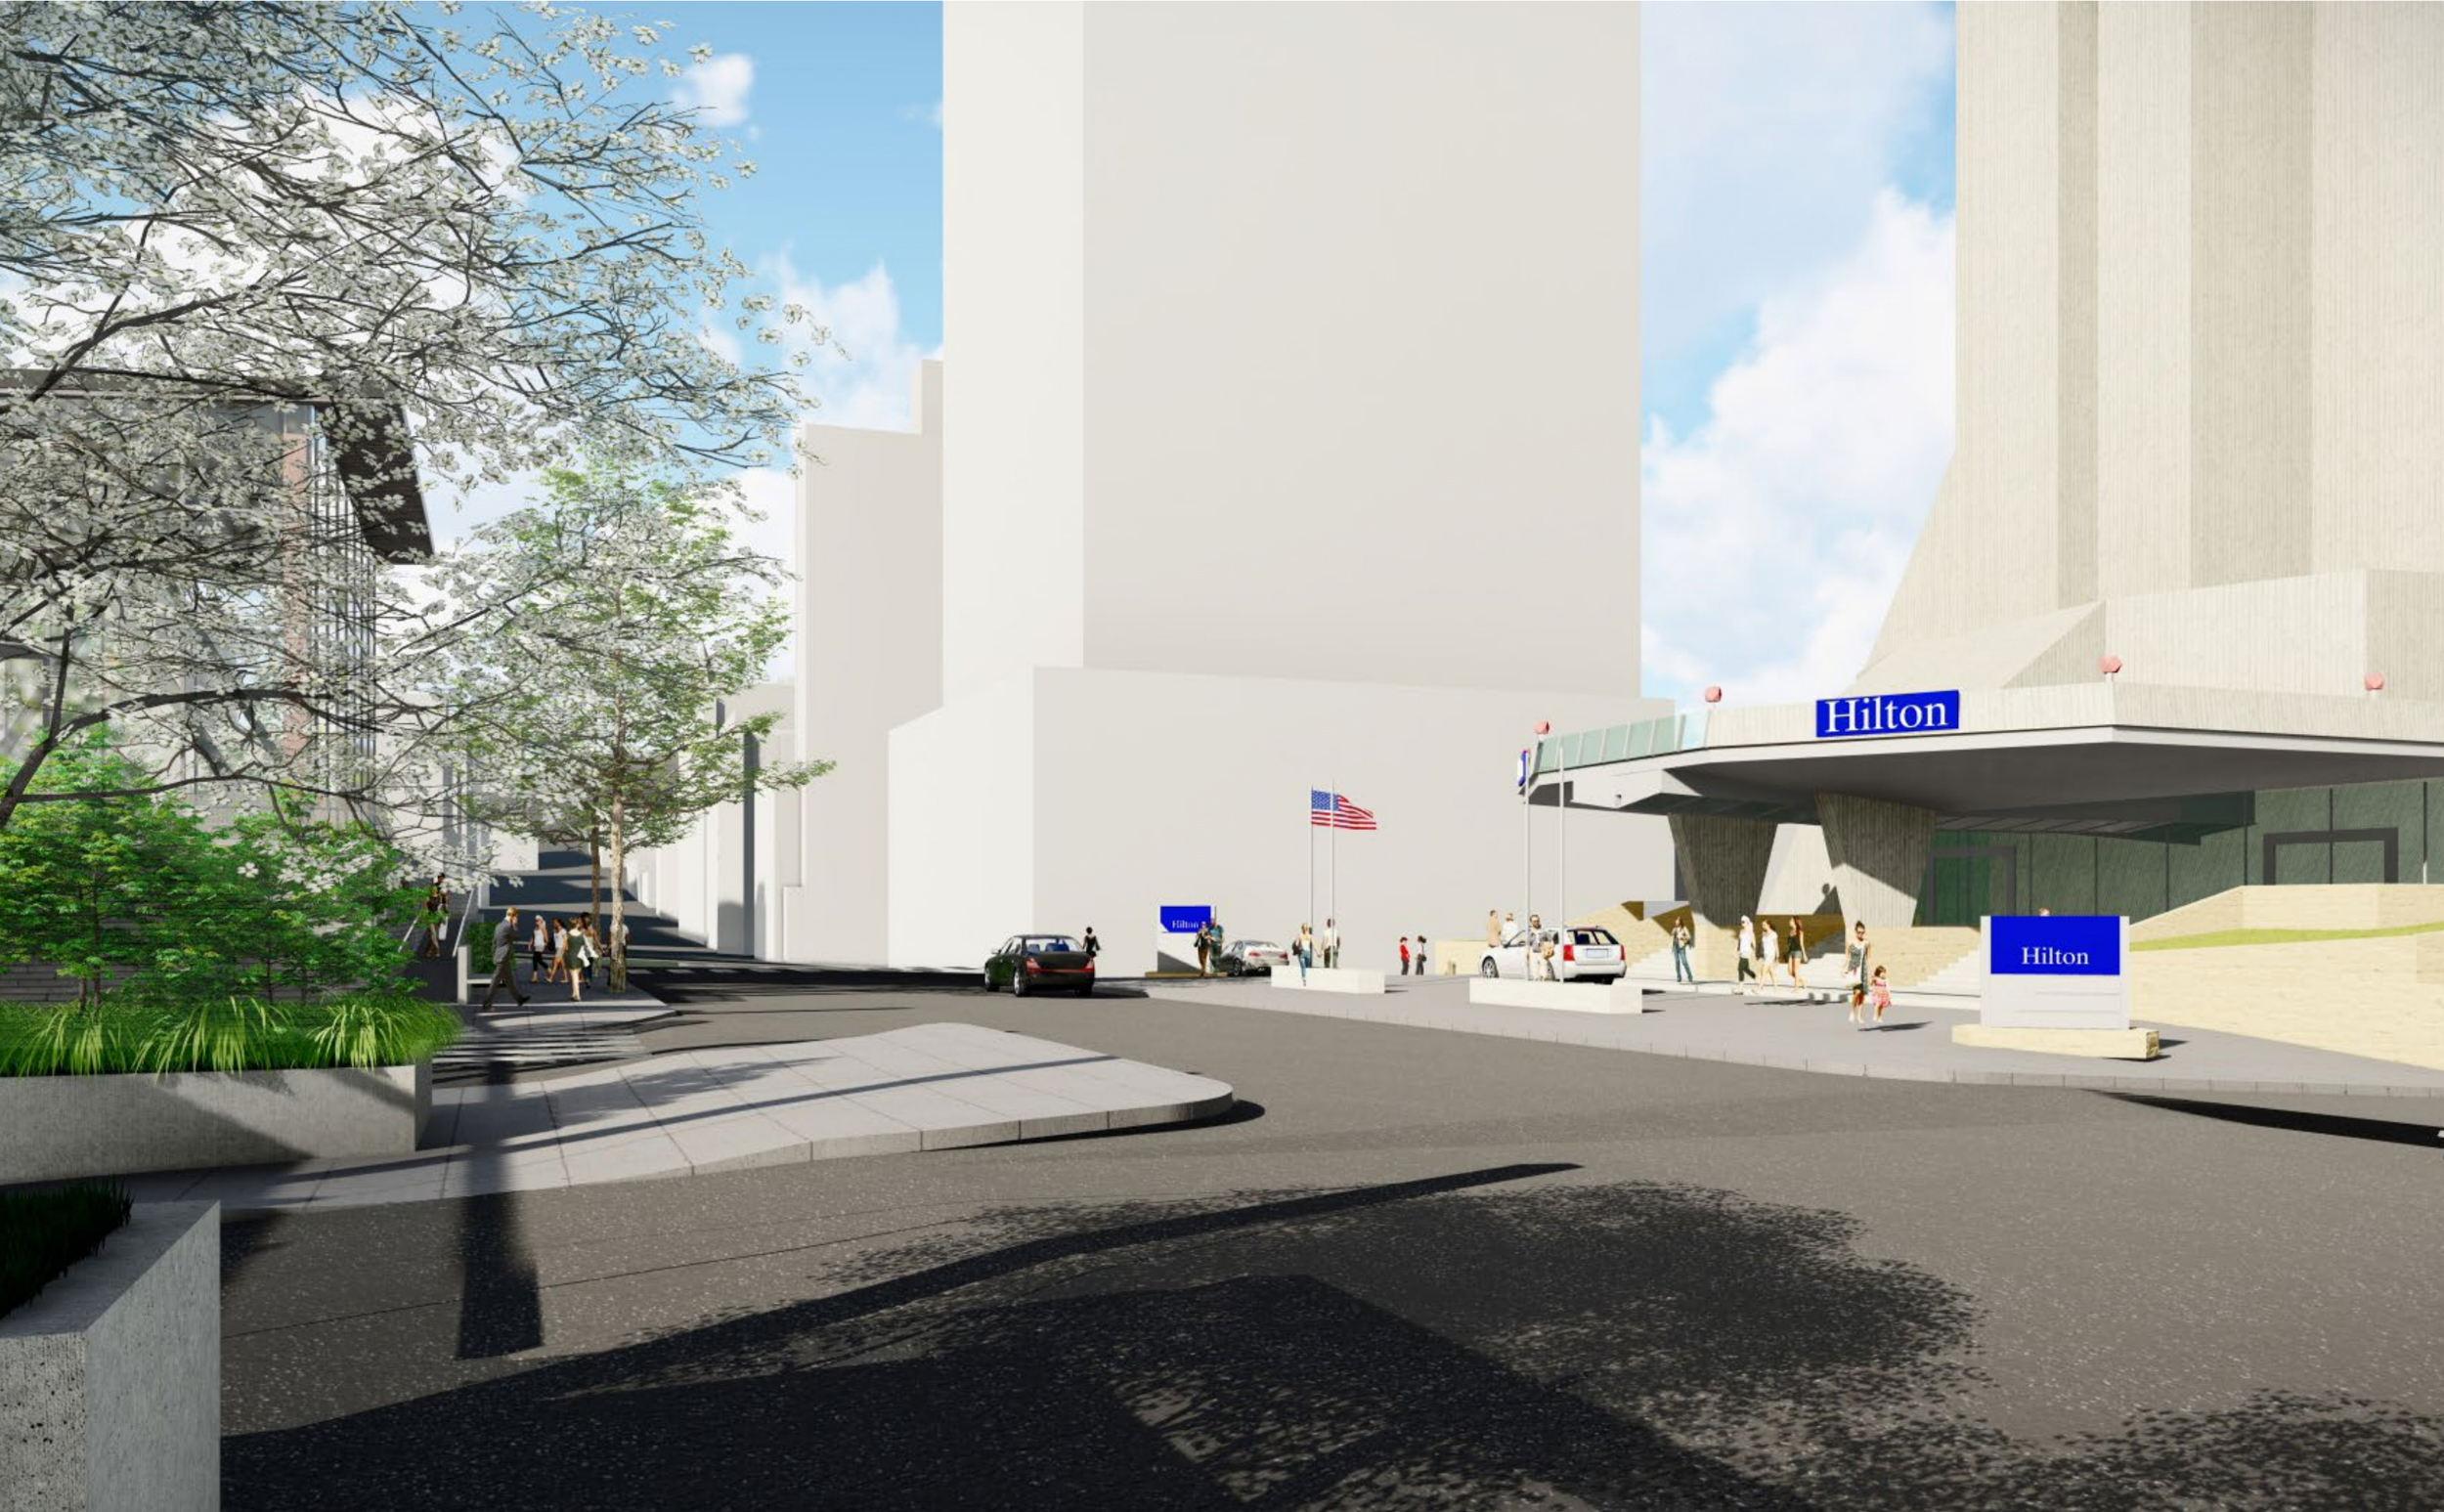 750 Kearny Street redesign, illustration by RDP